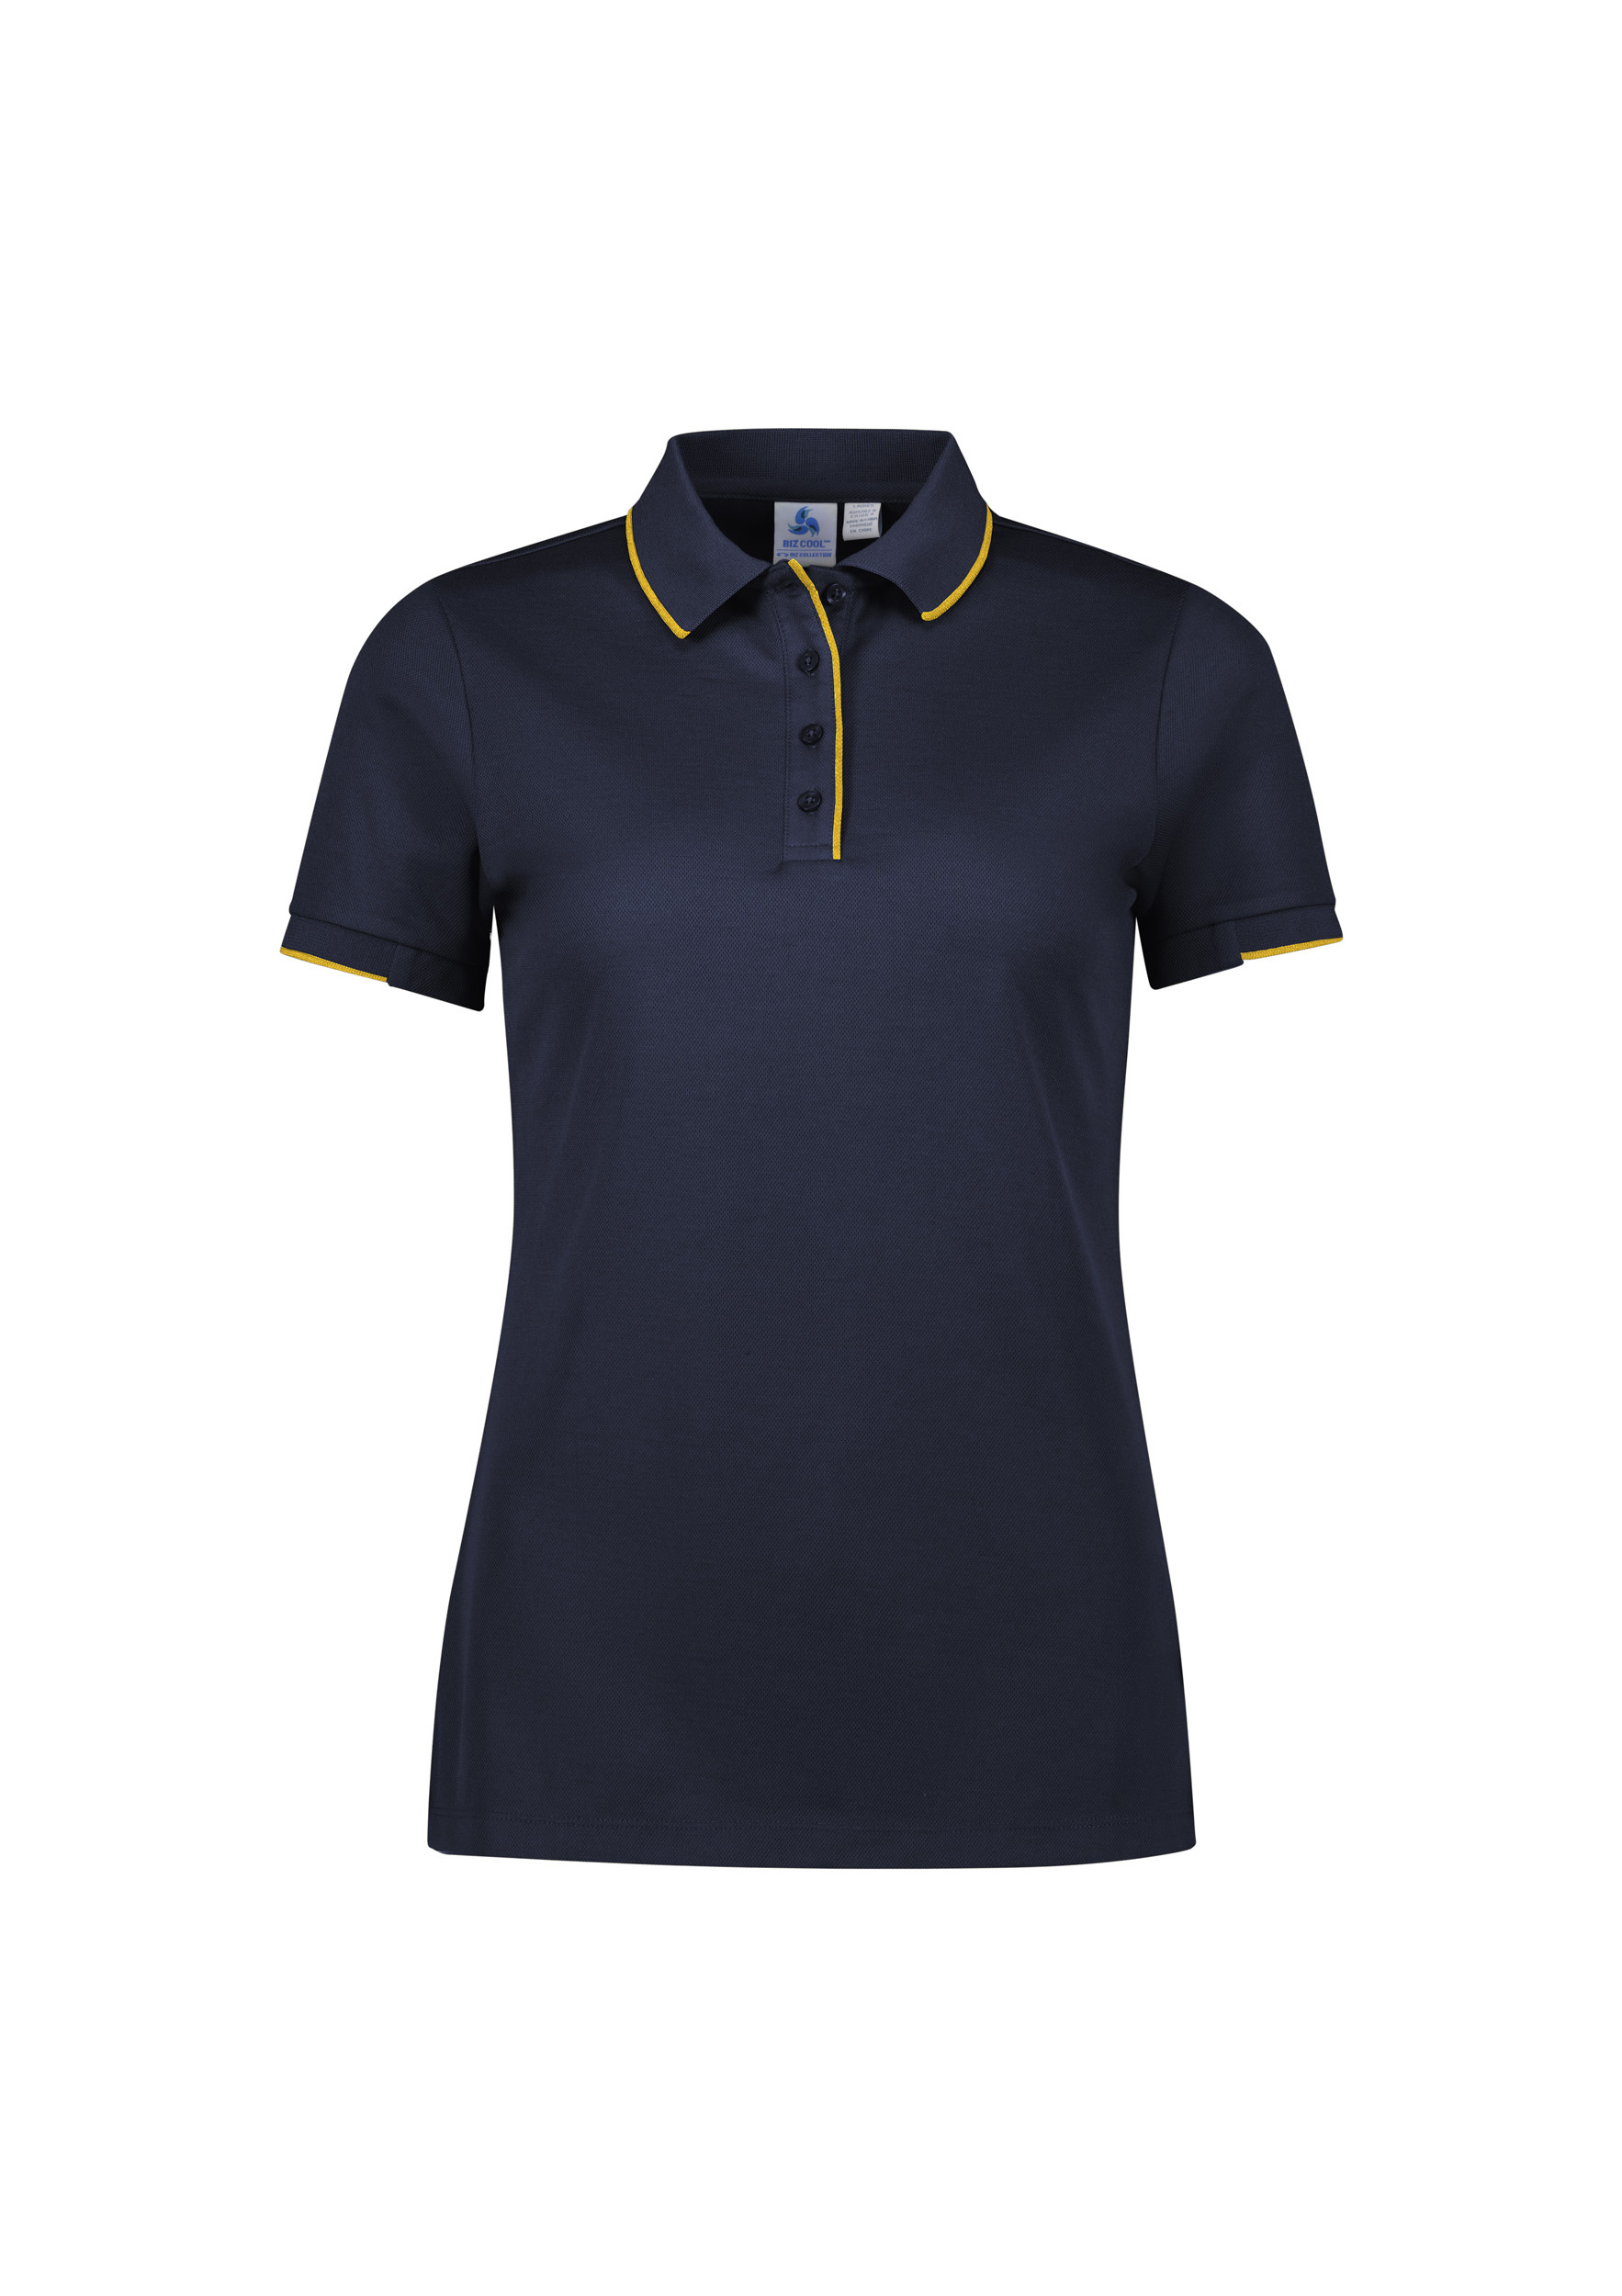 WOMENS FOCUS POLO NAVY/GOLD 10 80% POLY, 20% COTTON-BACK 185GSM